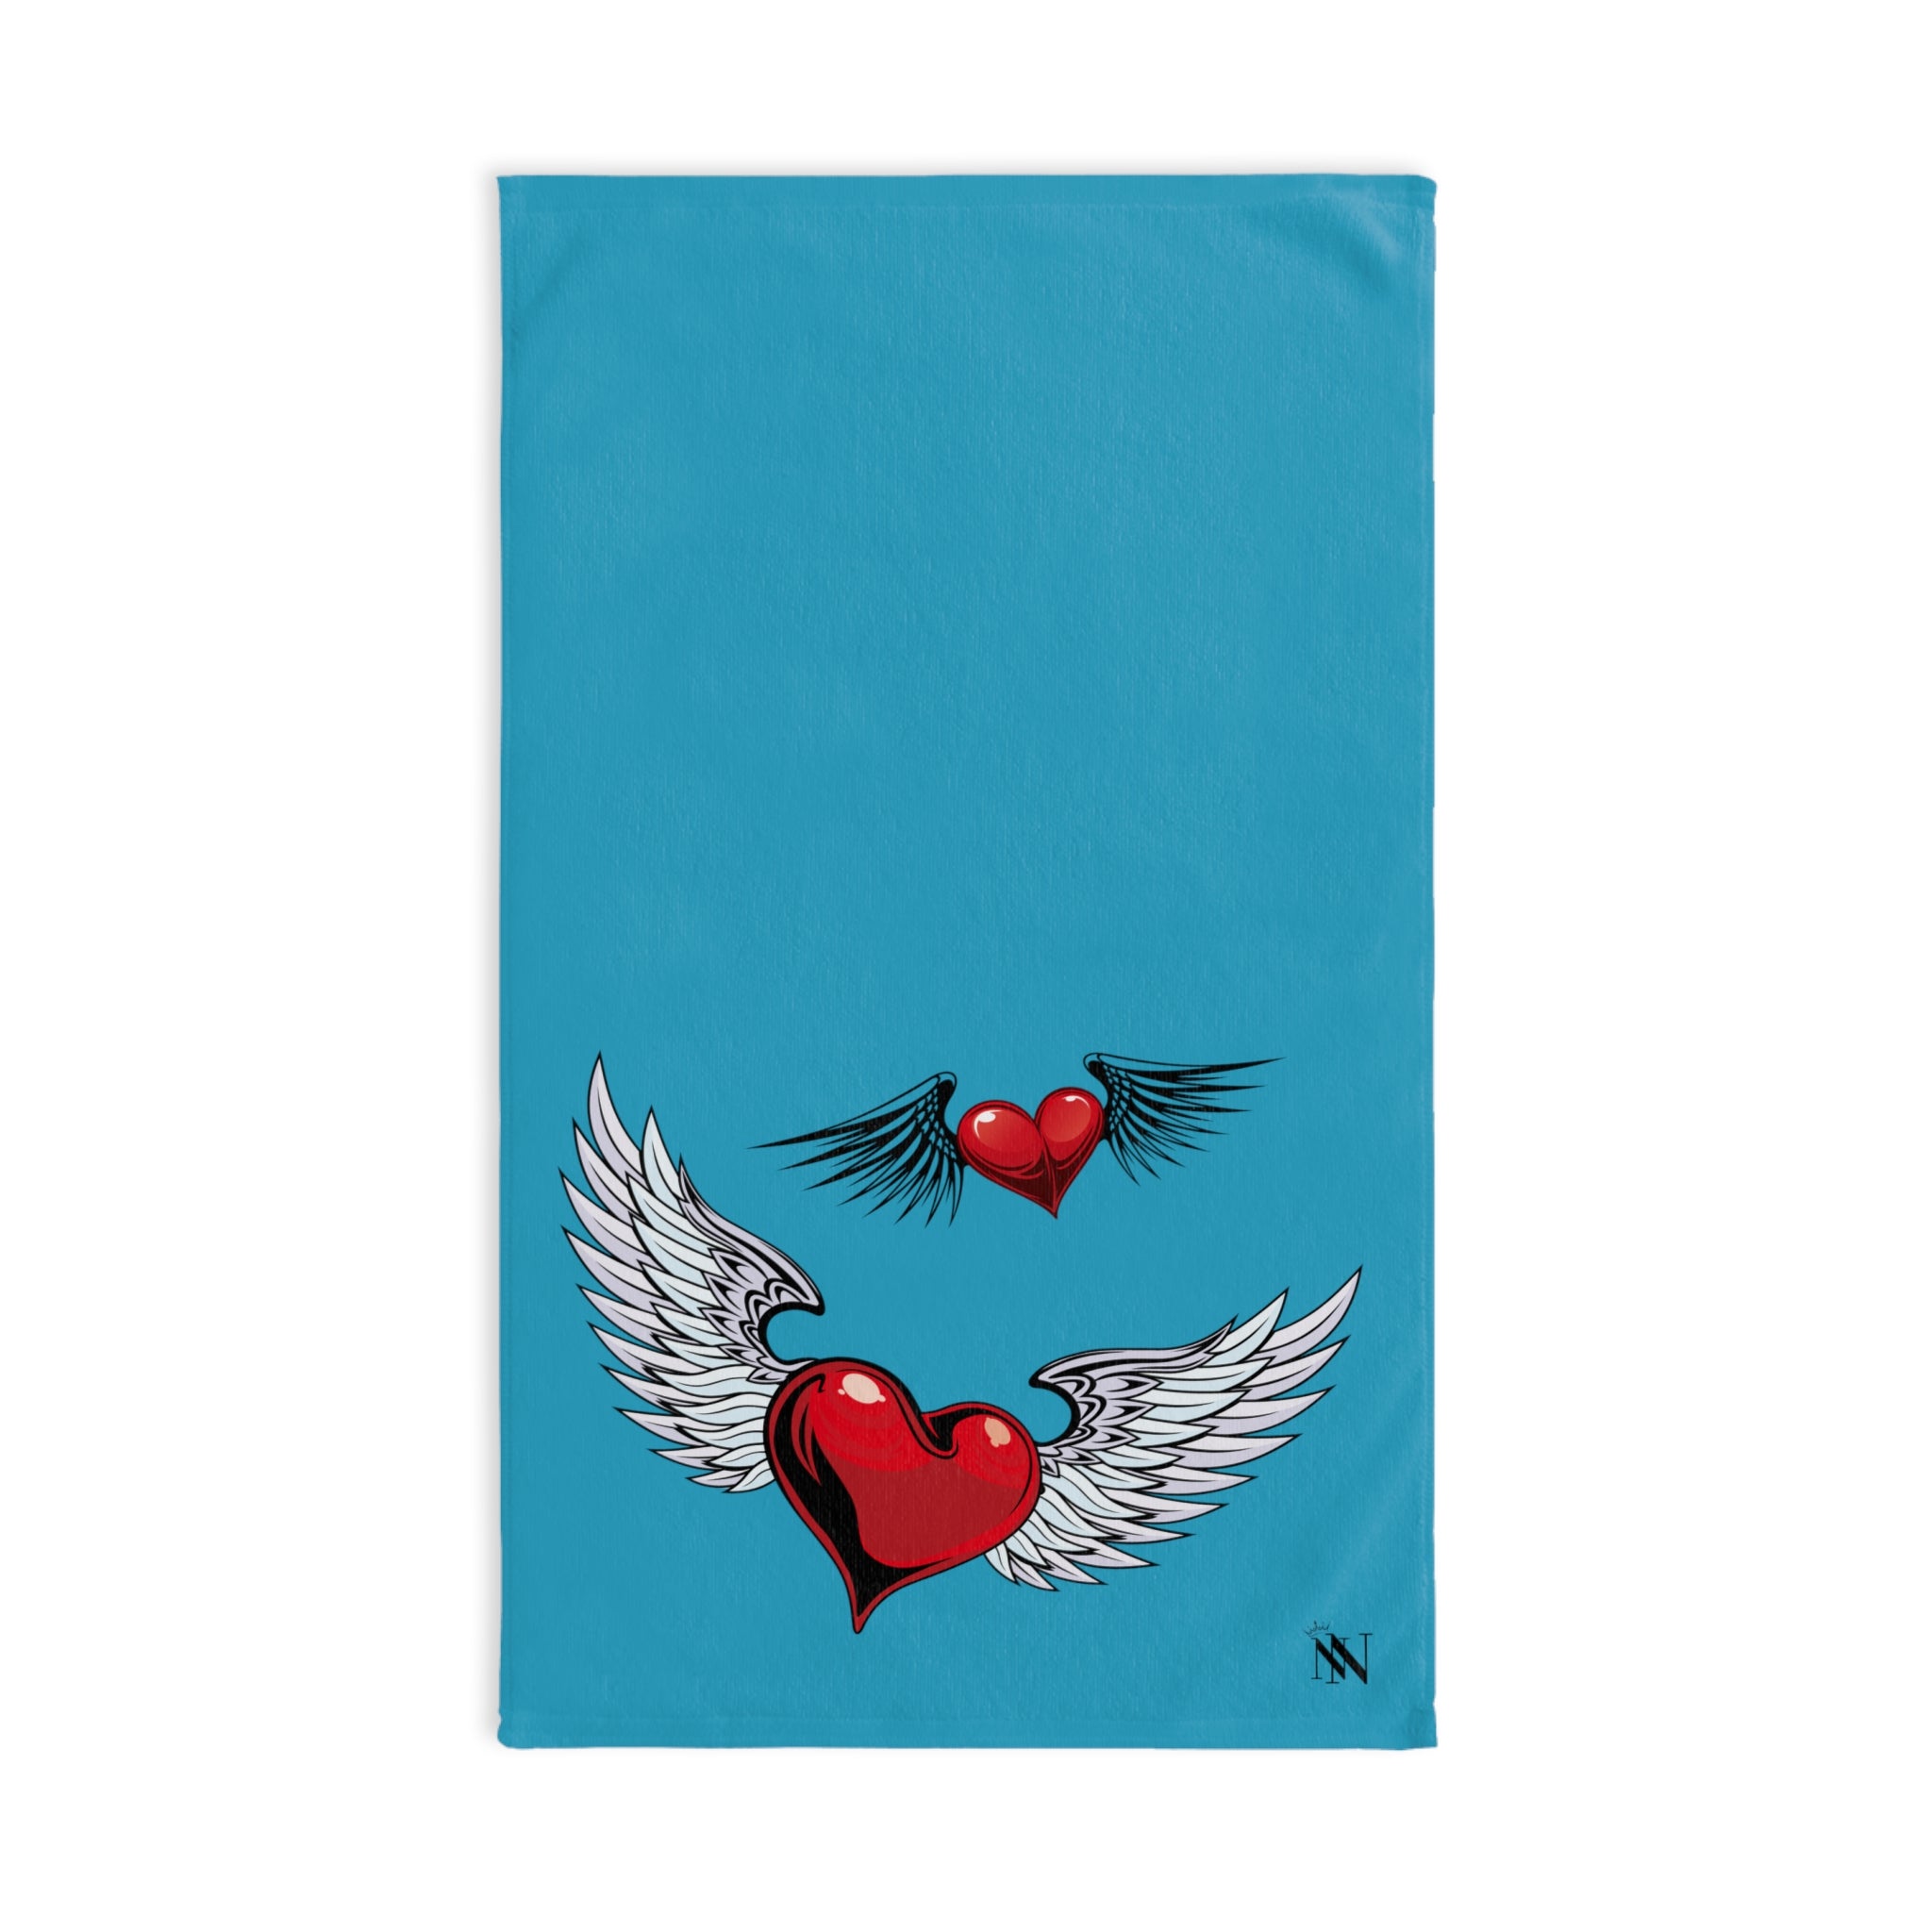 Twin Wing Heart Teal | Novelty Gifts for Boyfriend, Funny Towel Romantic Gift for Wedding Couple Fiance First Year Anniversary Valentines, Party Gag Gifts, Joke Humor Cloth for Husband Men BF NECTAR NAPKINS